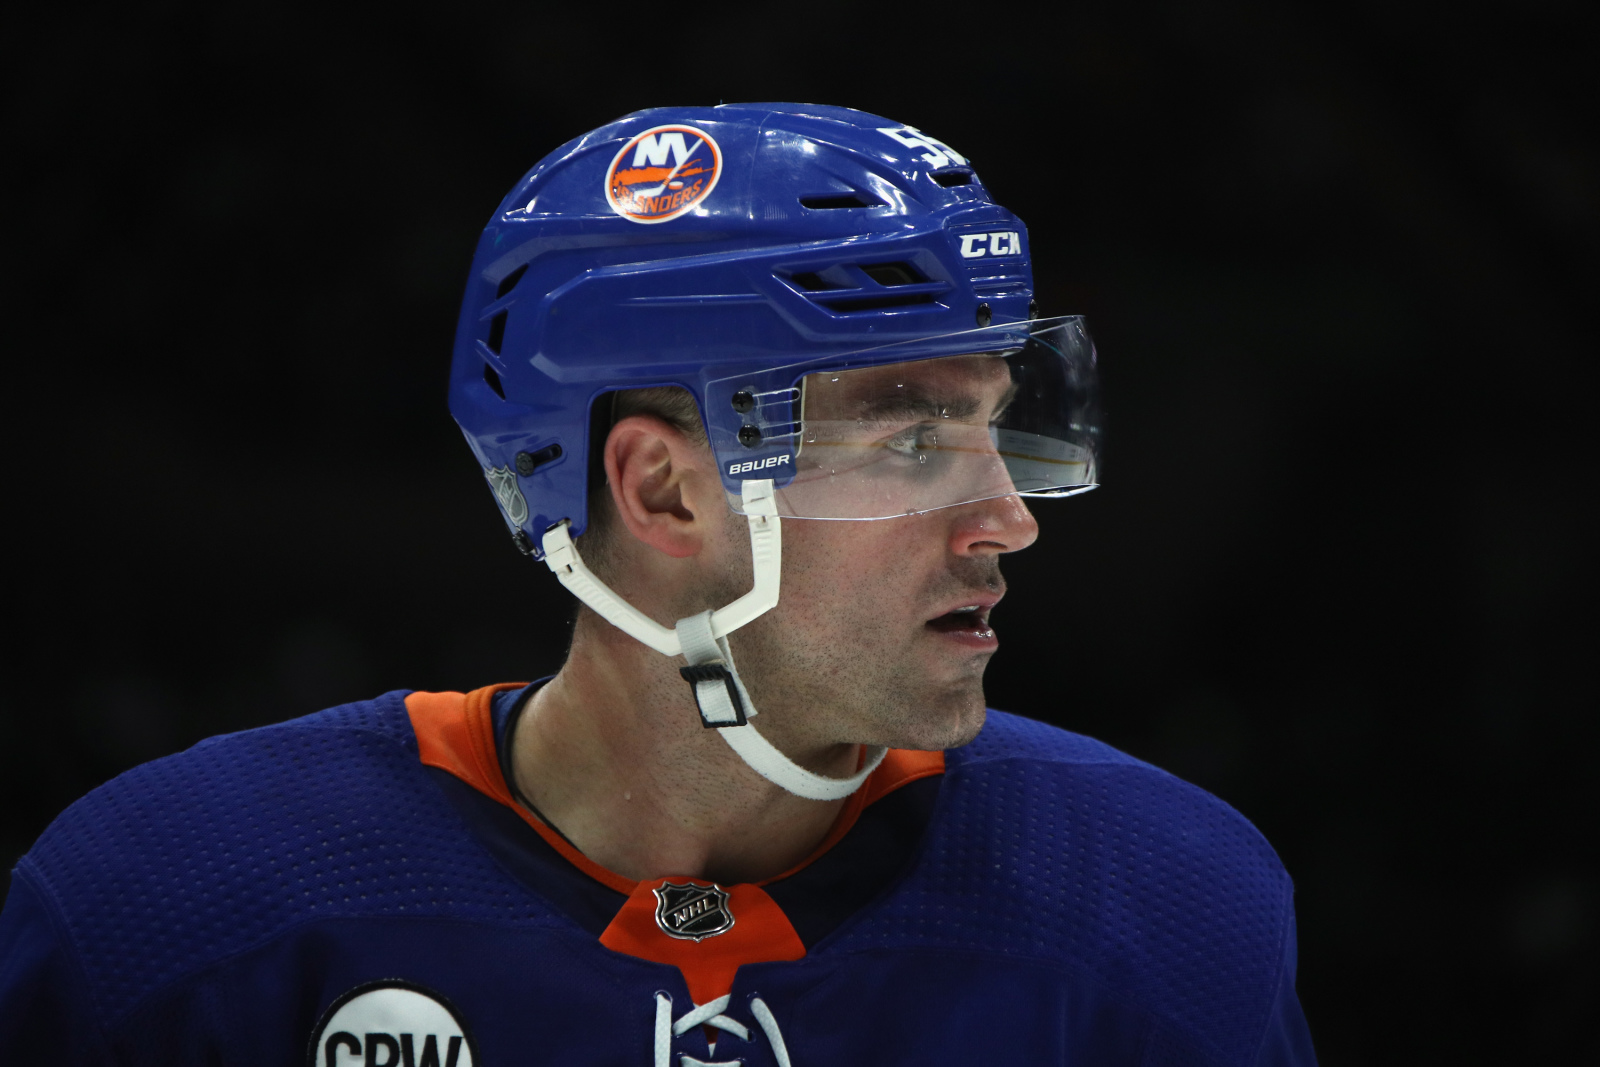 Johnny Boychuk takes a skate to the eye and leaves ice in a panic